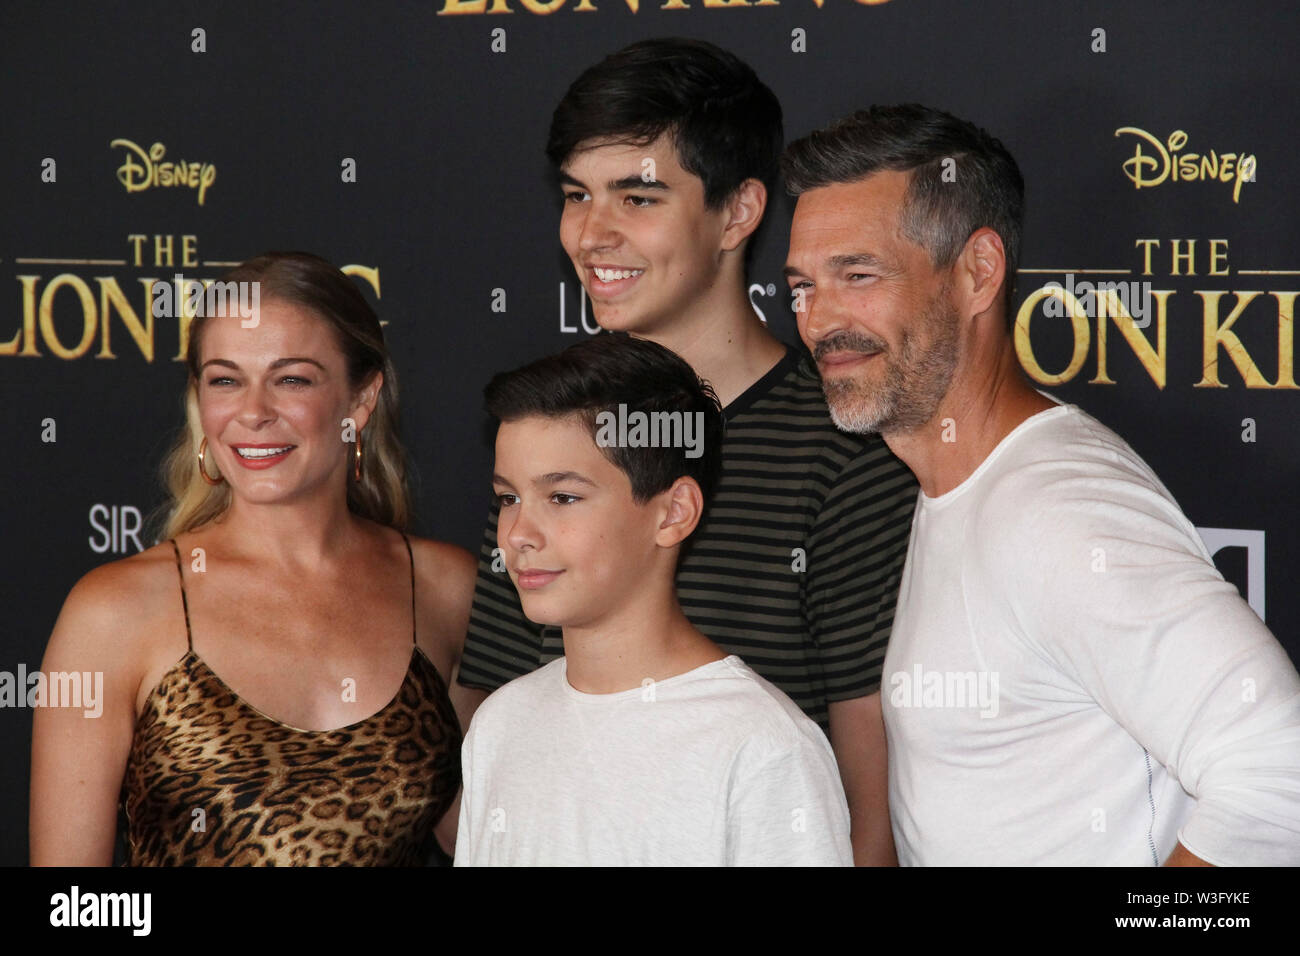 Eddie Cibrian, sons and LeAnn Rimes at World Premiere of Disney's "The Lion King". Held at the Dolby Theater in Hollywood, CA, July 9, 2019. Photo by: Richard Chavez / PictureLux Stock Photo